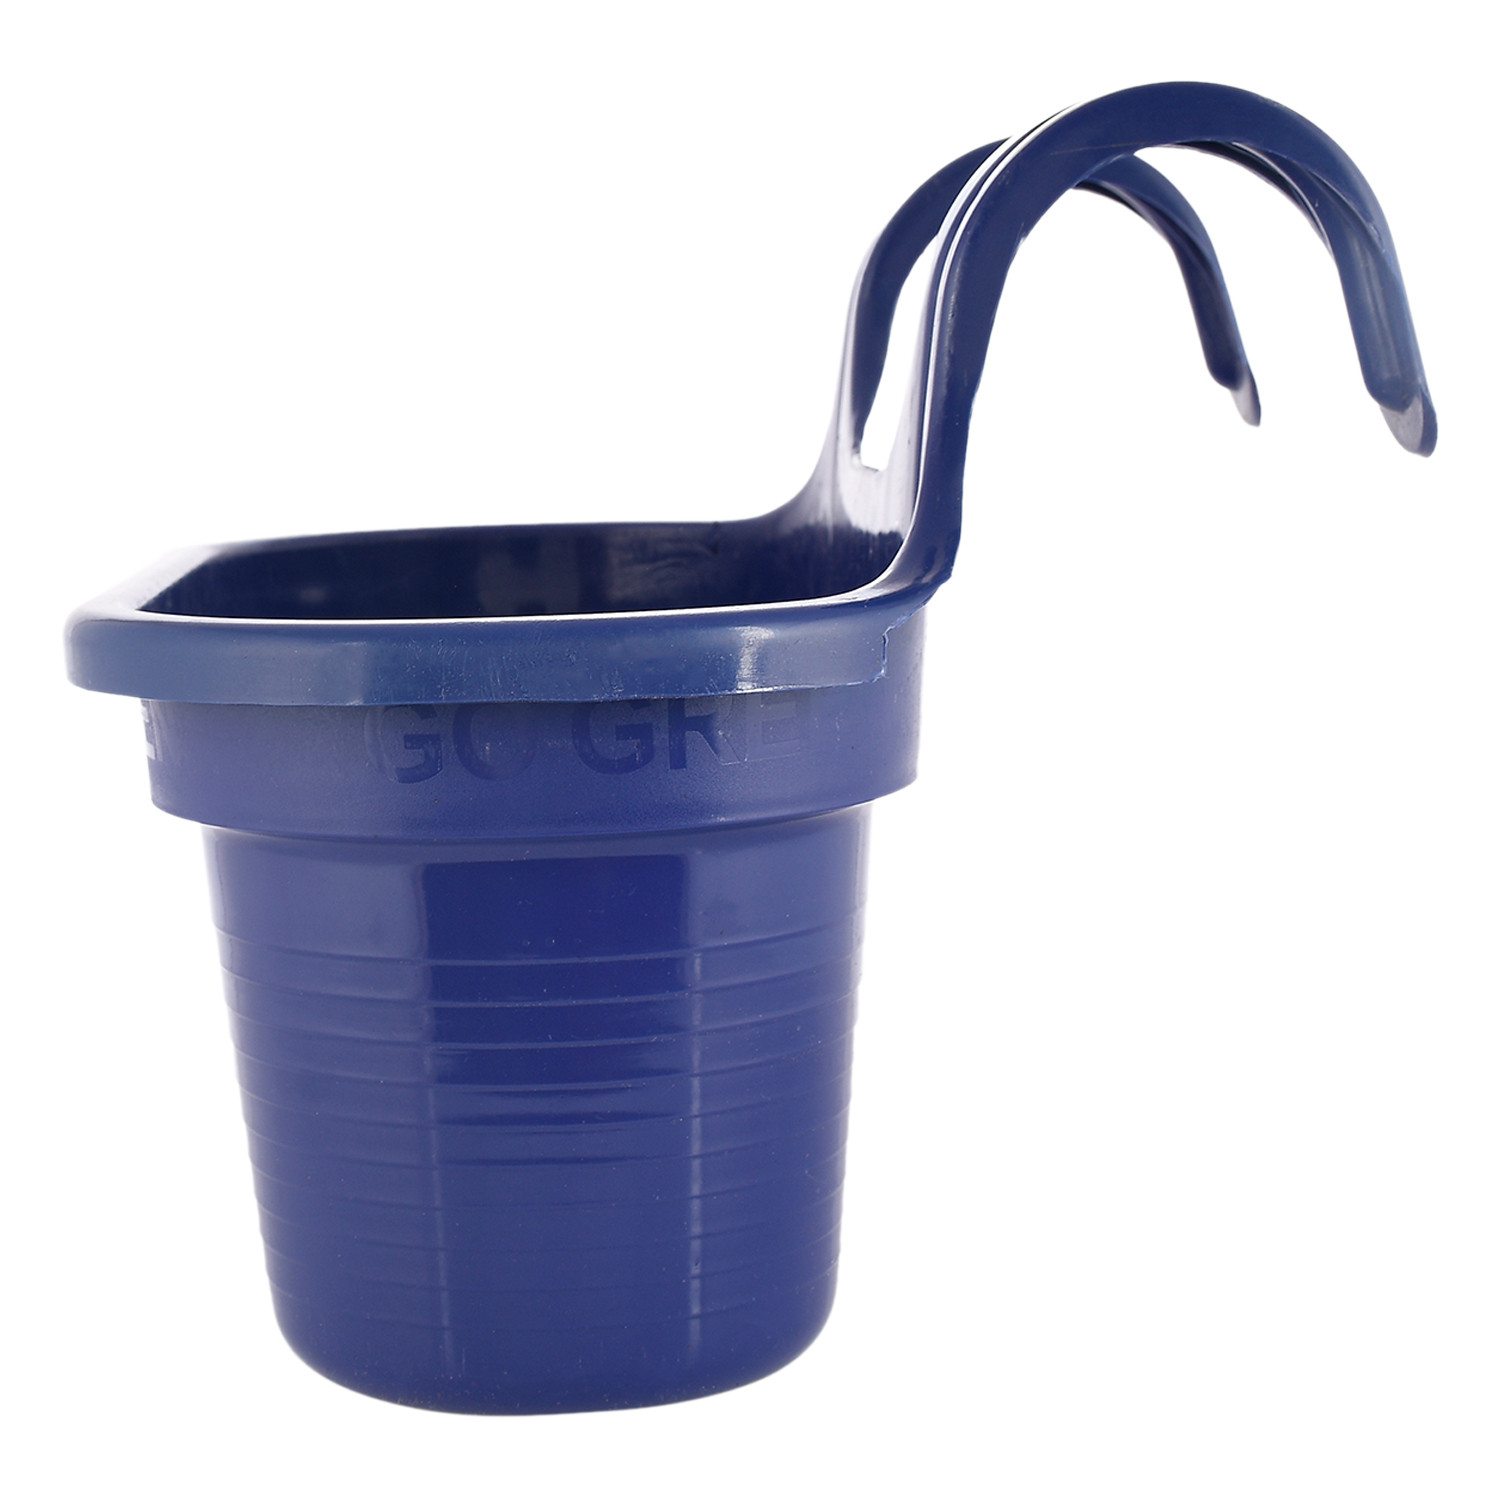 Kuber Industries Hanging Flower Pot|Double Hook Plant Container|Durable Plastic Glossy Finish Pots for Home|Balcony|Garden|12 Inch|Pack of 2 (Blue & Green)